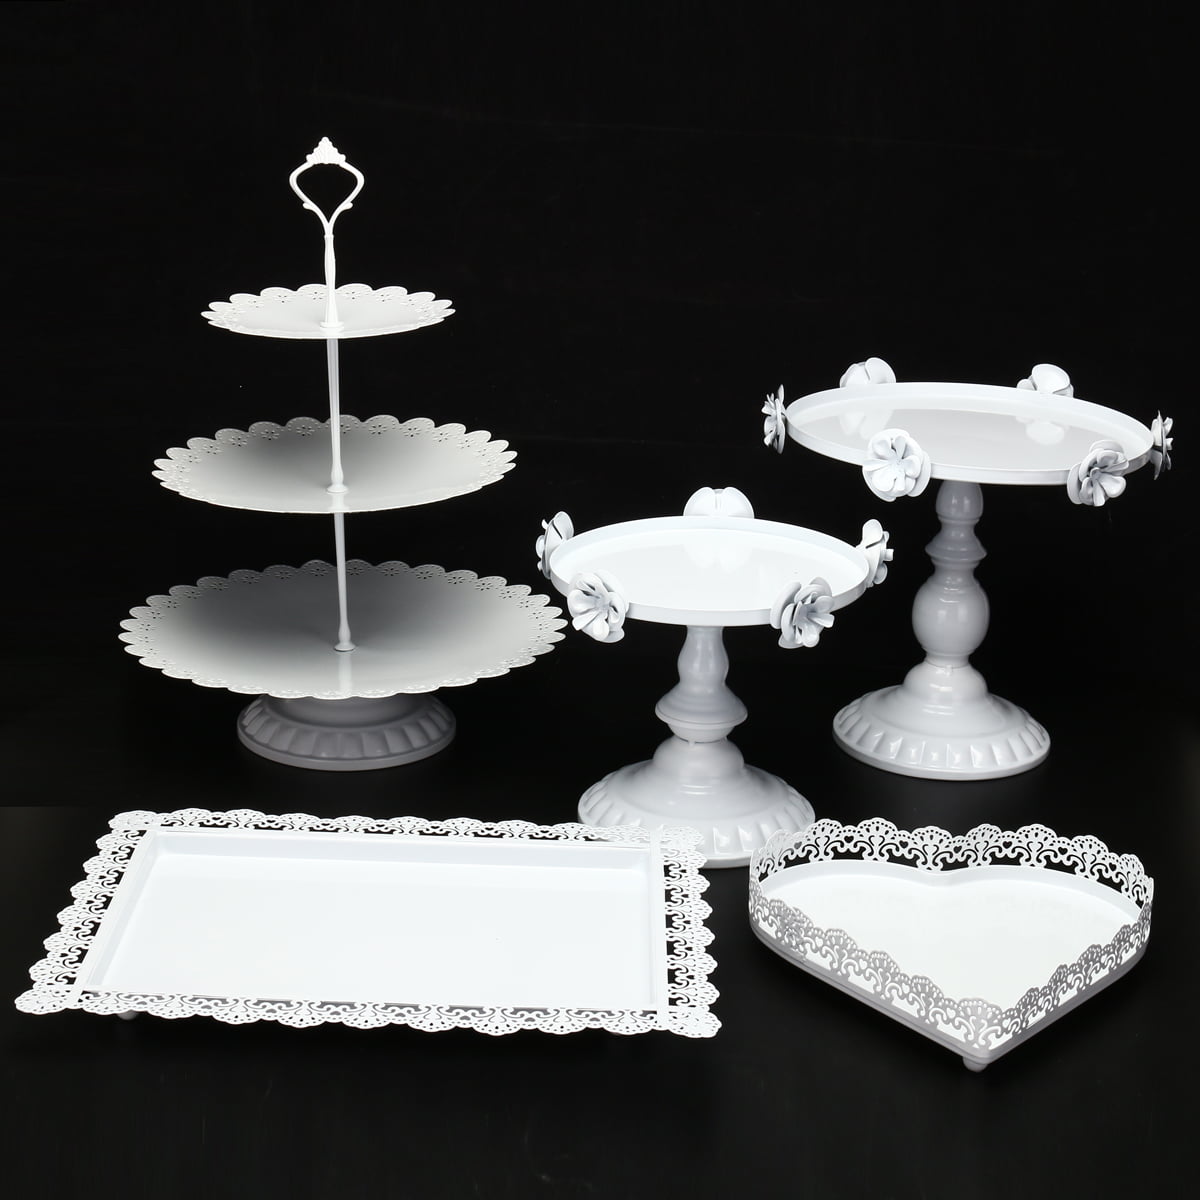 Cake Stand,Round Cake Stand Metal Cupcake Holder Dessert Display Plate Cupcake Serving Platter for Party Wedding Birthday Home Decor 